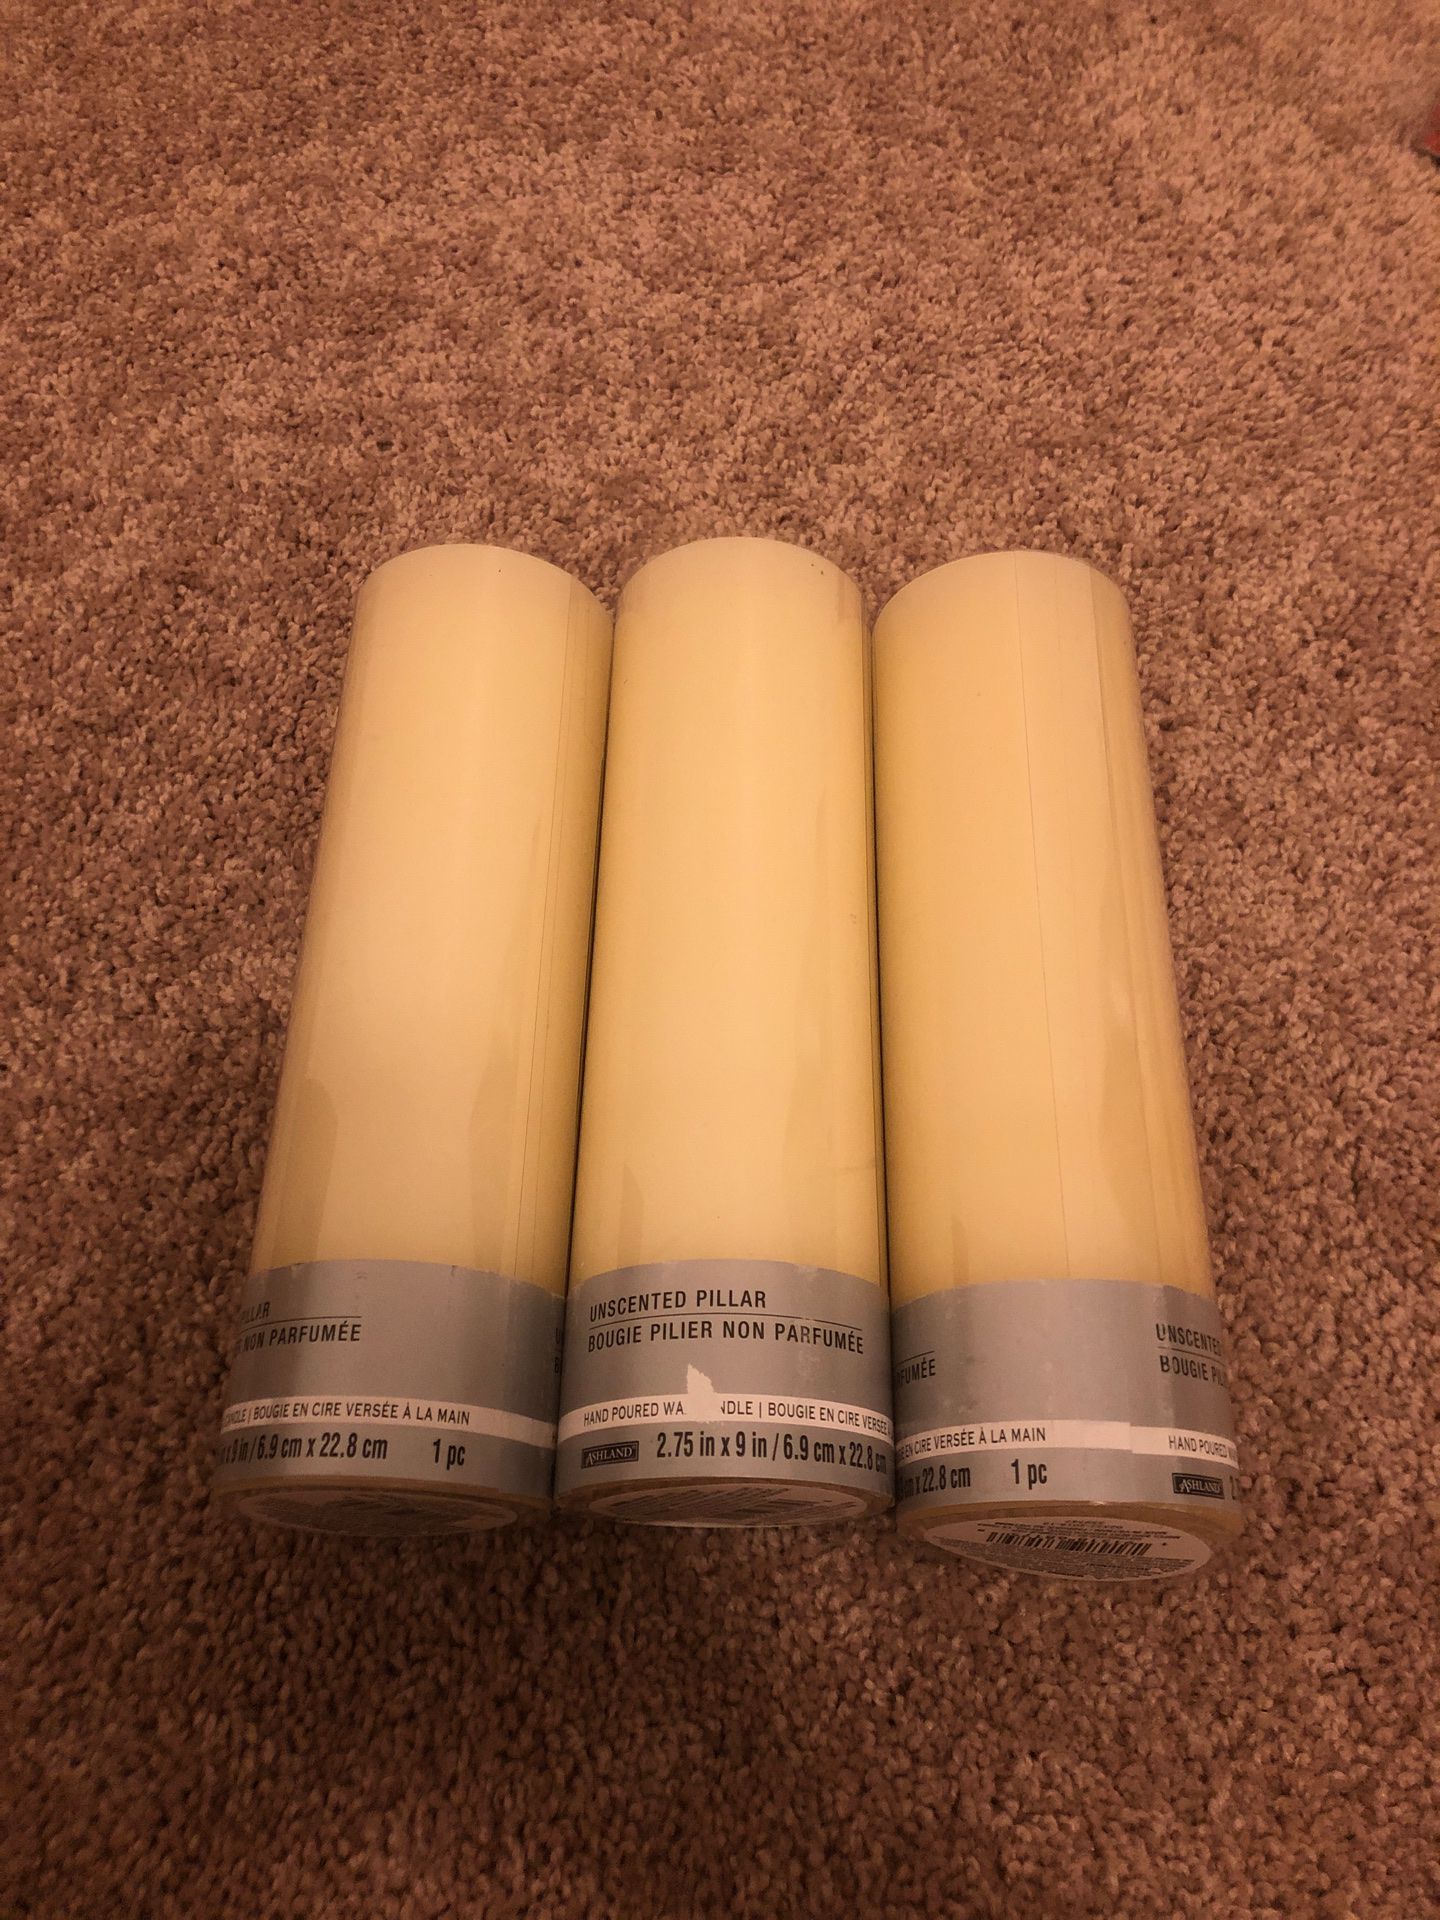 Unscented pillar candles, never used